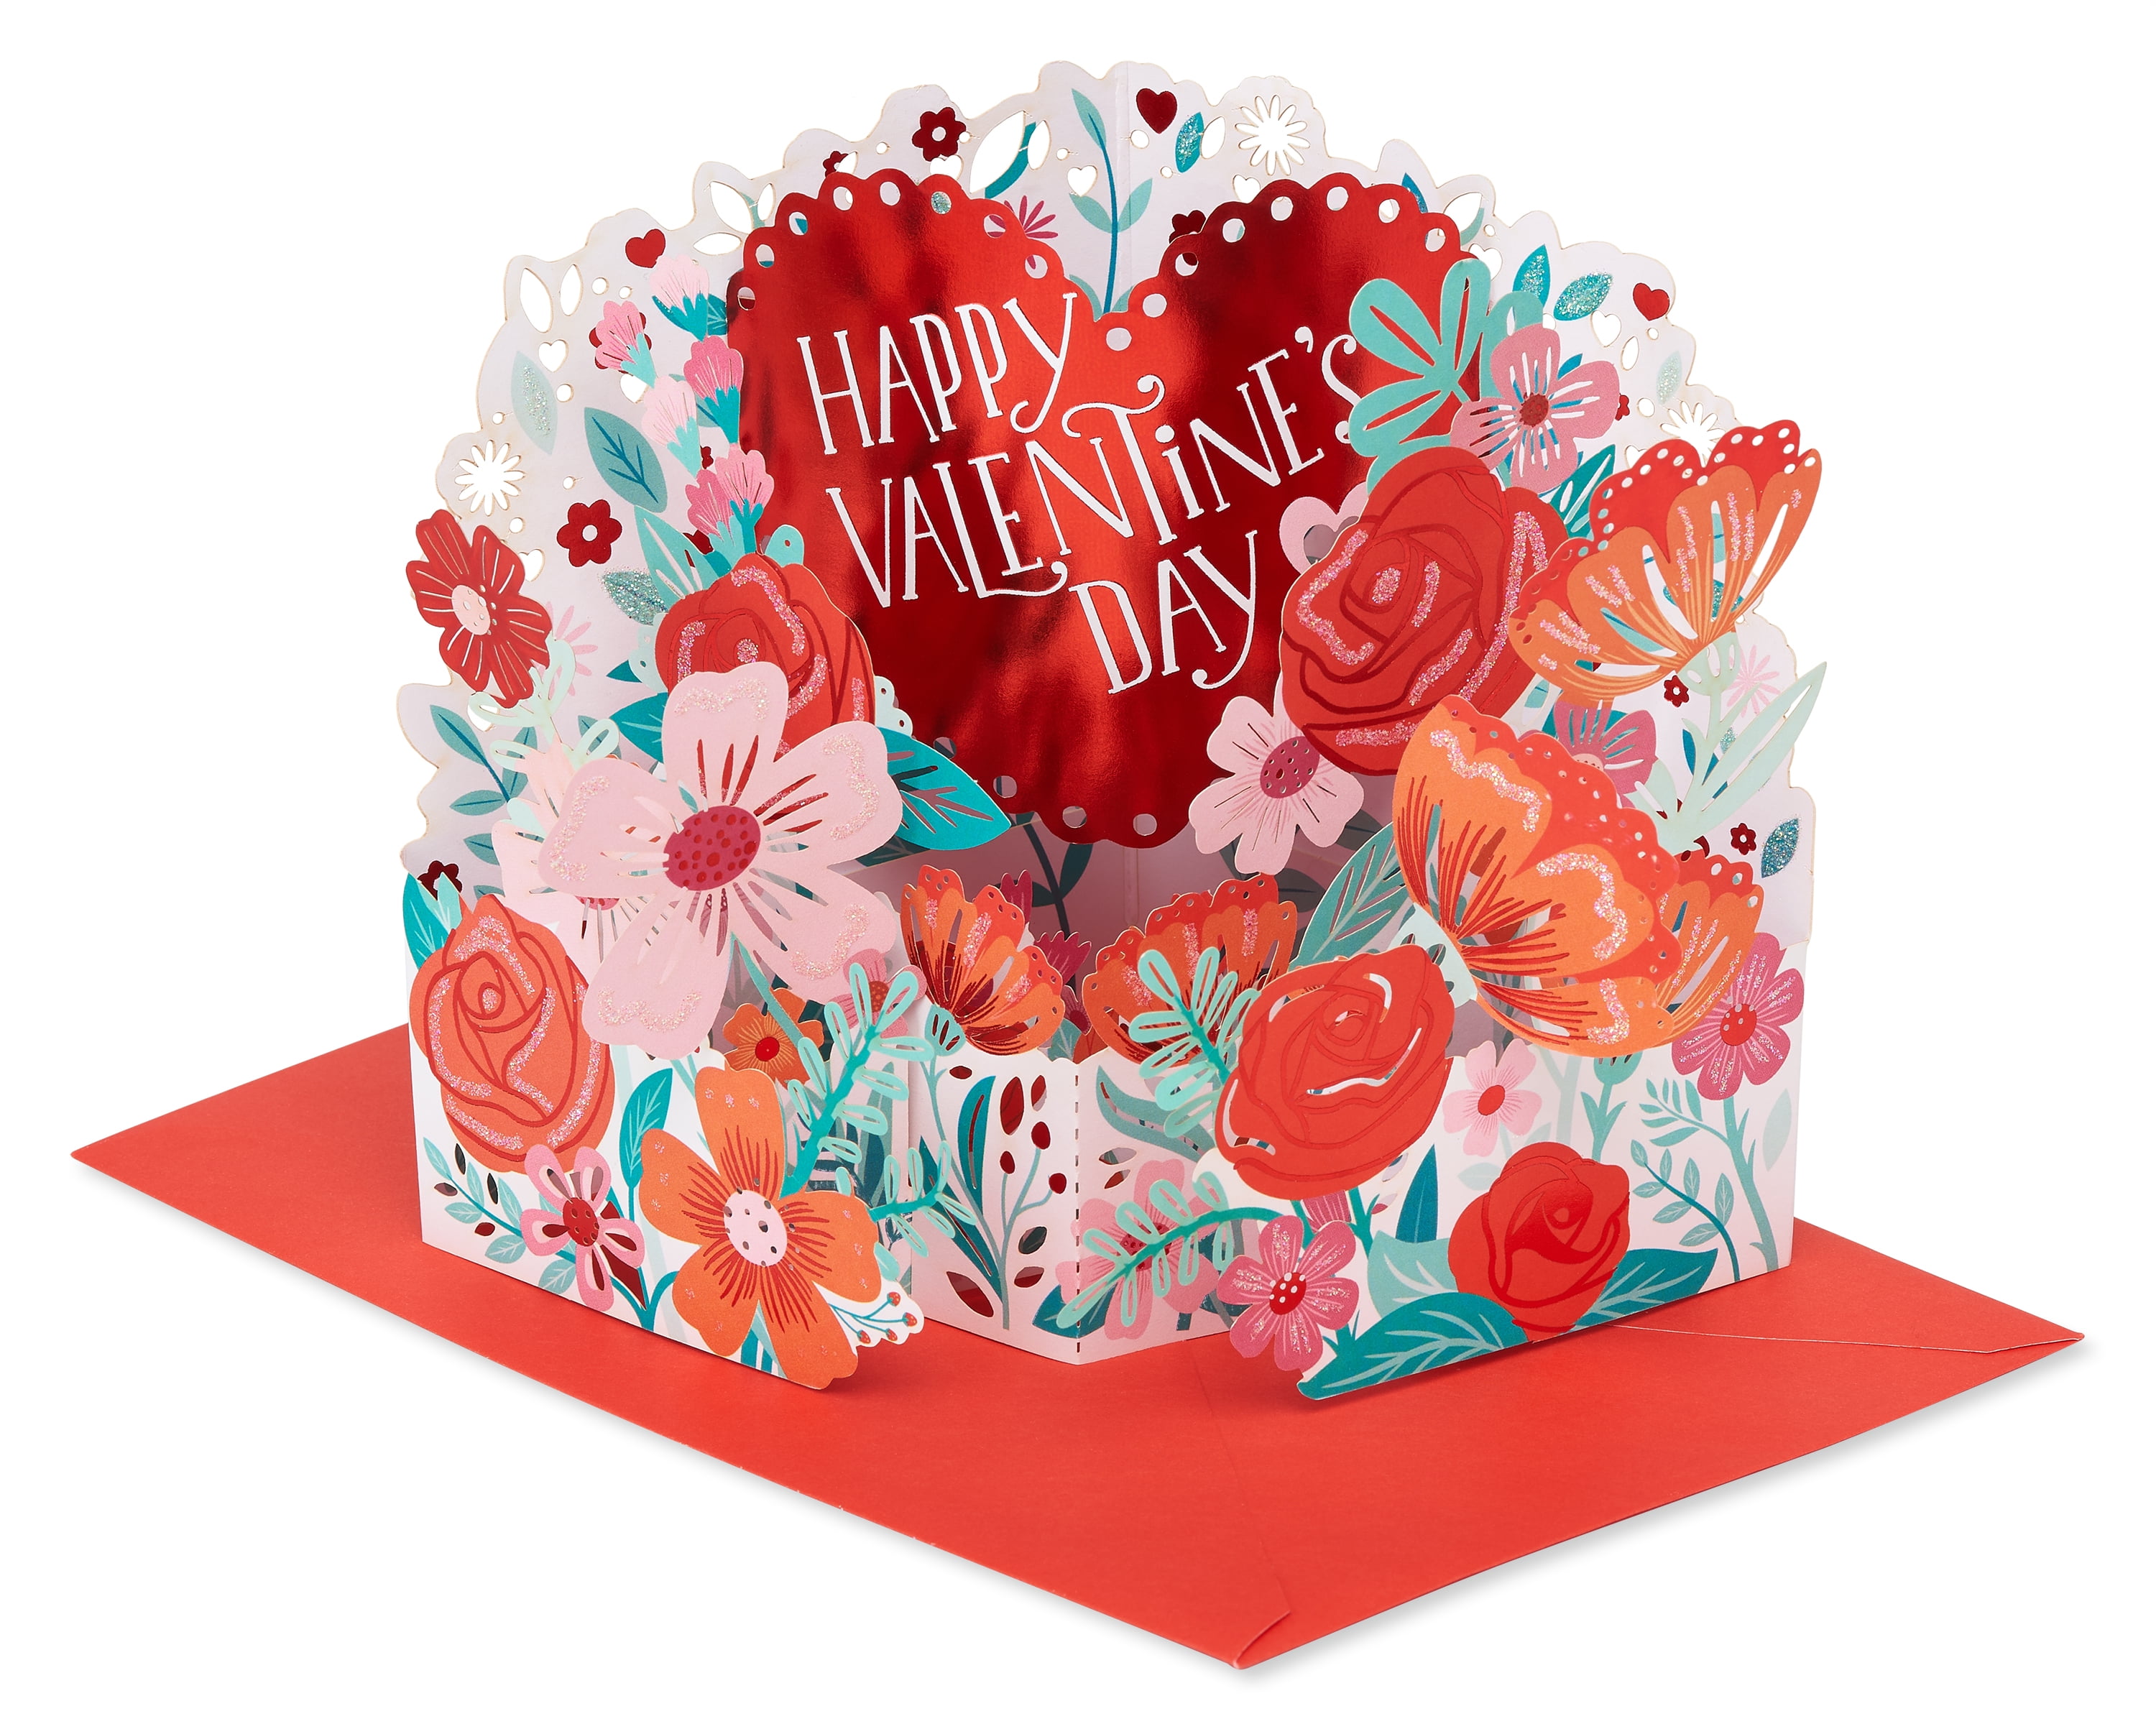 American Greetings Valentine’s Day Magic Moments Pop-Up Card (Floral Heart)